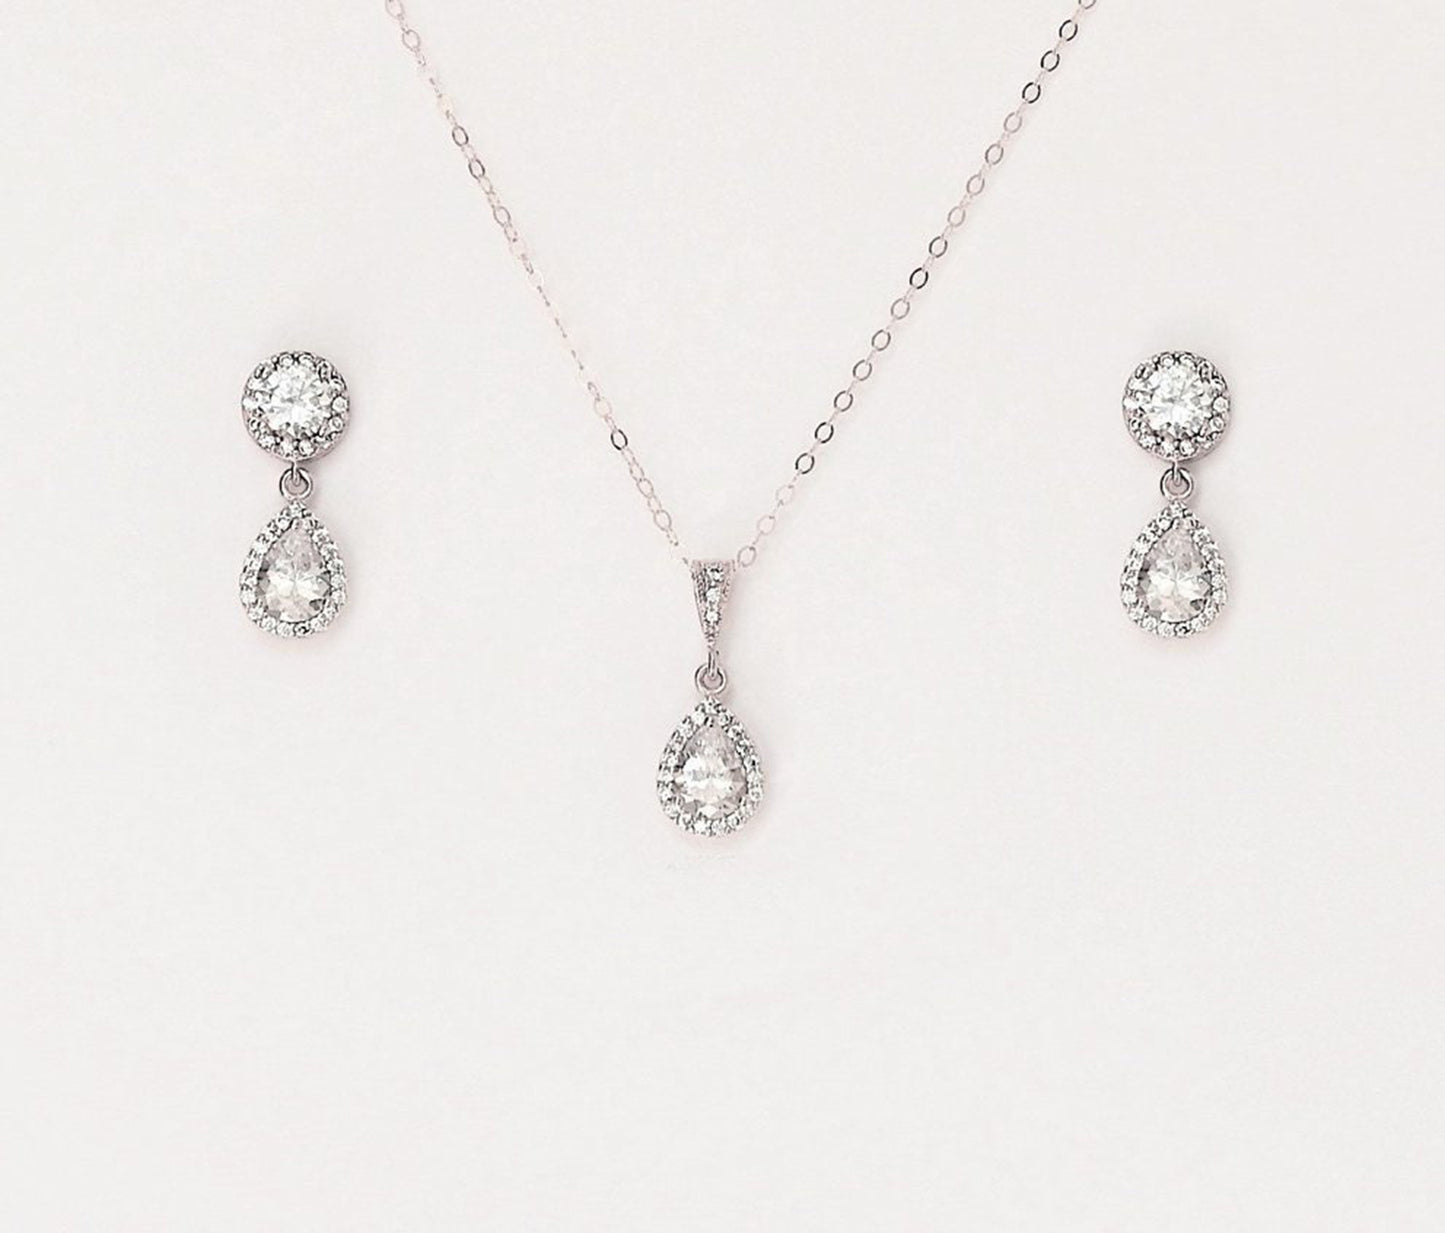 Matching silver necklace and earring set with paved teardrop cubic zirconia on a blank background.